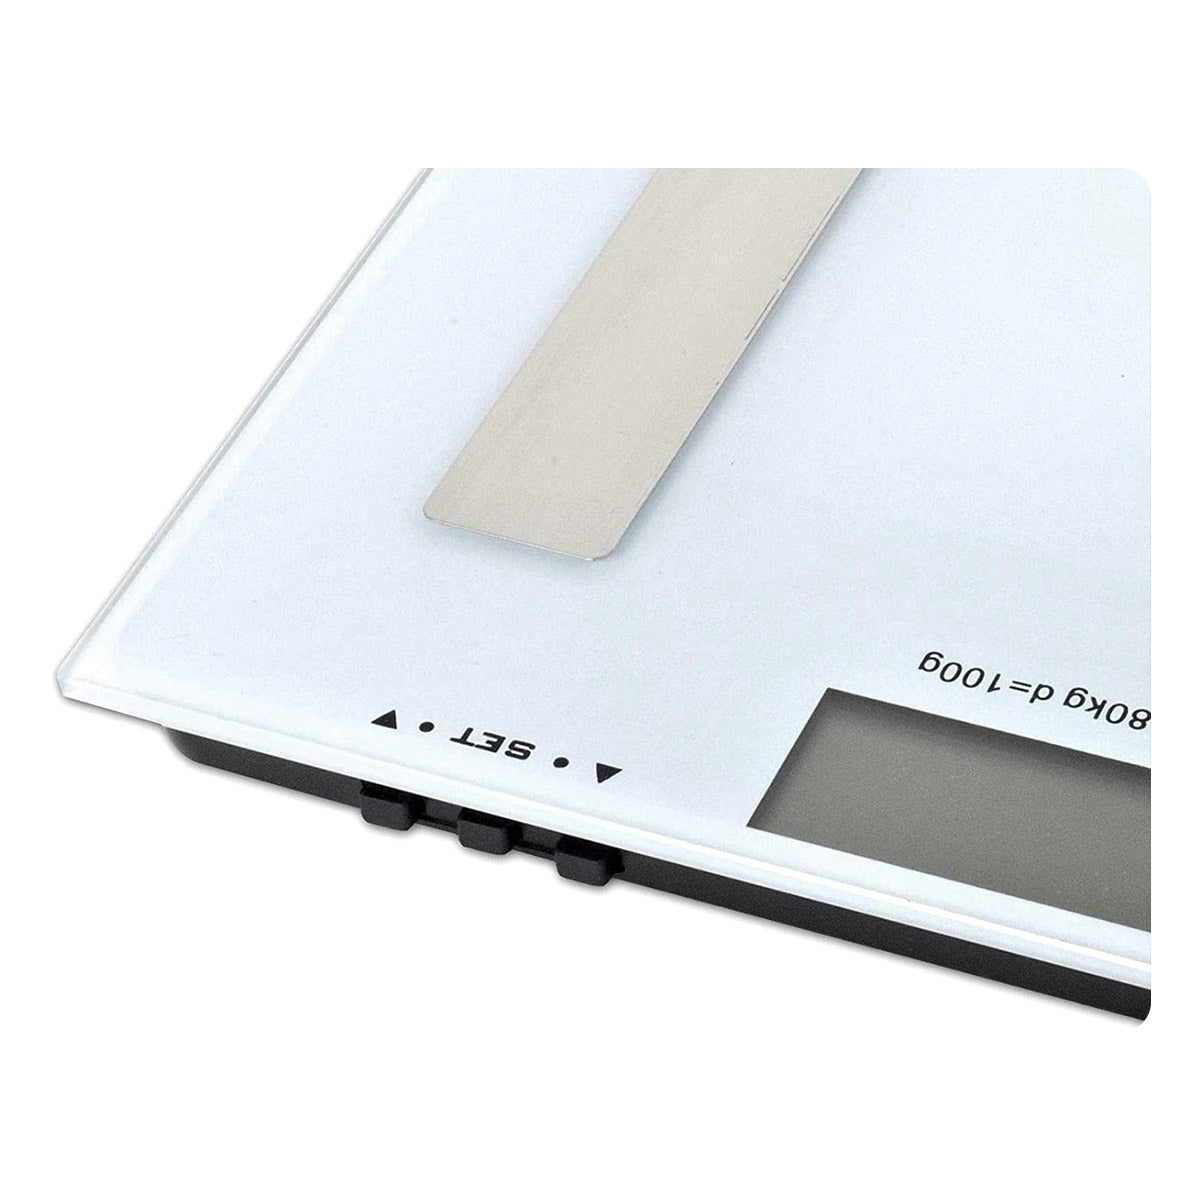 <tc>Ariko</tc> Elta Digital Body - Fit Scale - Personal Scale - Analysis Scale - White - Gray - Dimensions 28 x 28 x 2.5 Cm - Maximum 180 KG - Including 2 x AAA batteries